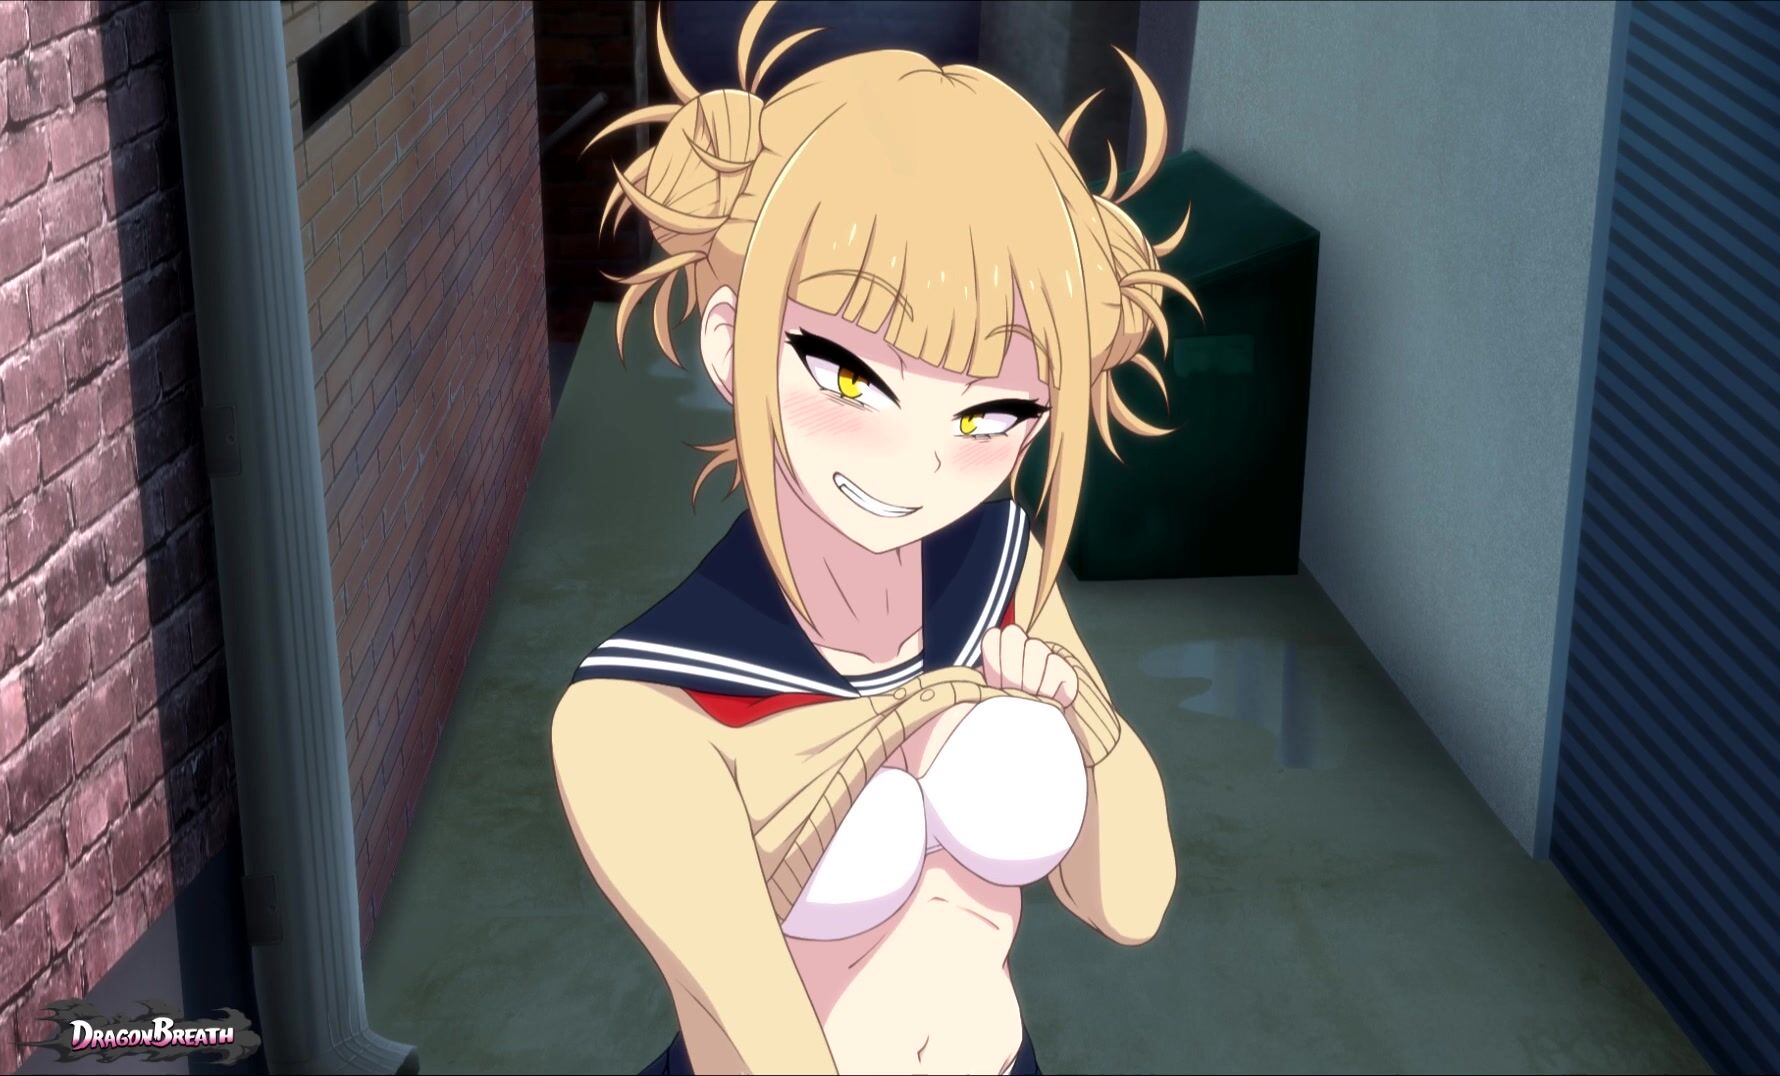 Quickie with toga